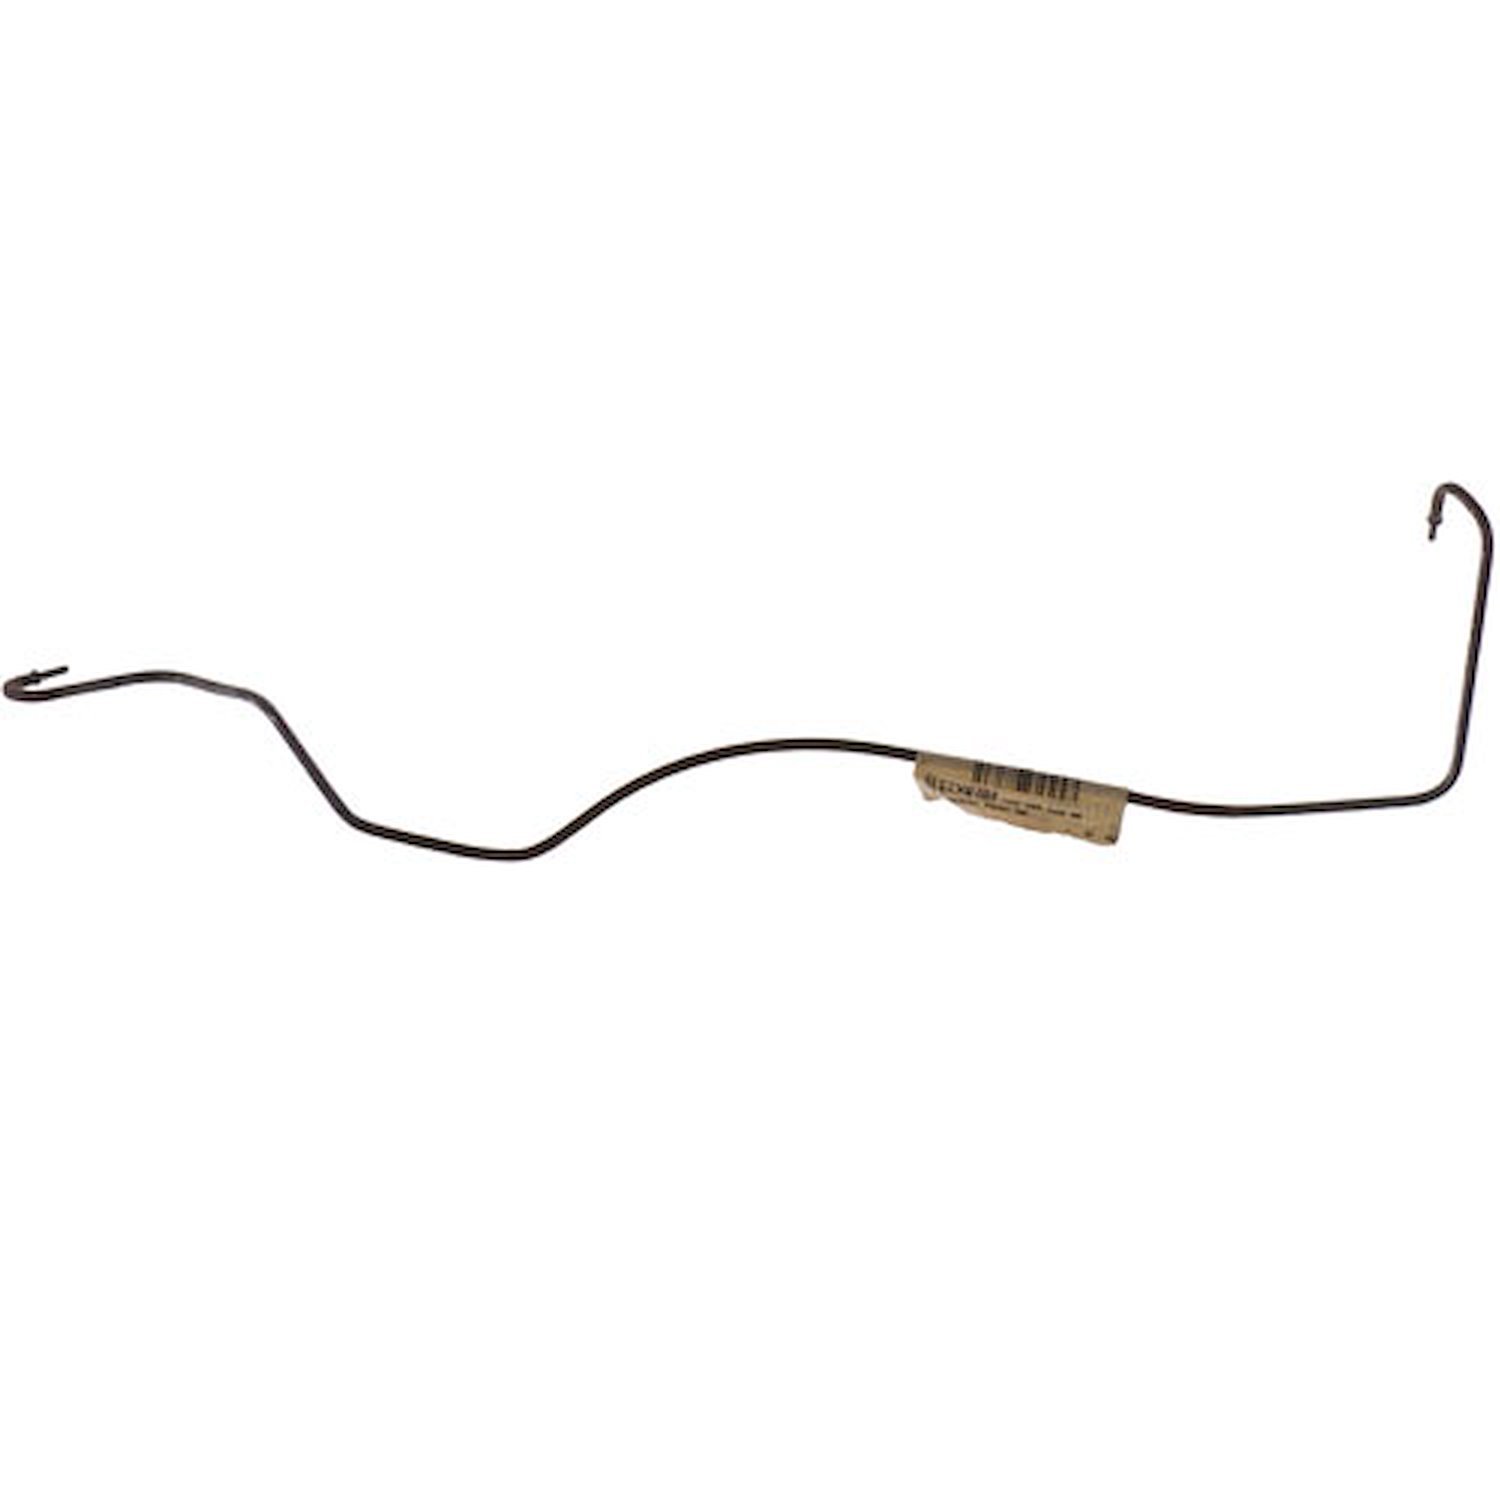 TTV8704 Transmission Vacuum Line for 1987-1995 Chevy Truck 4WD